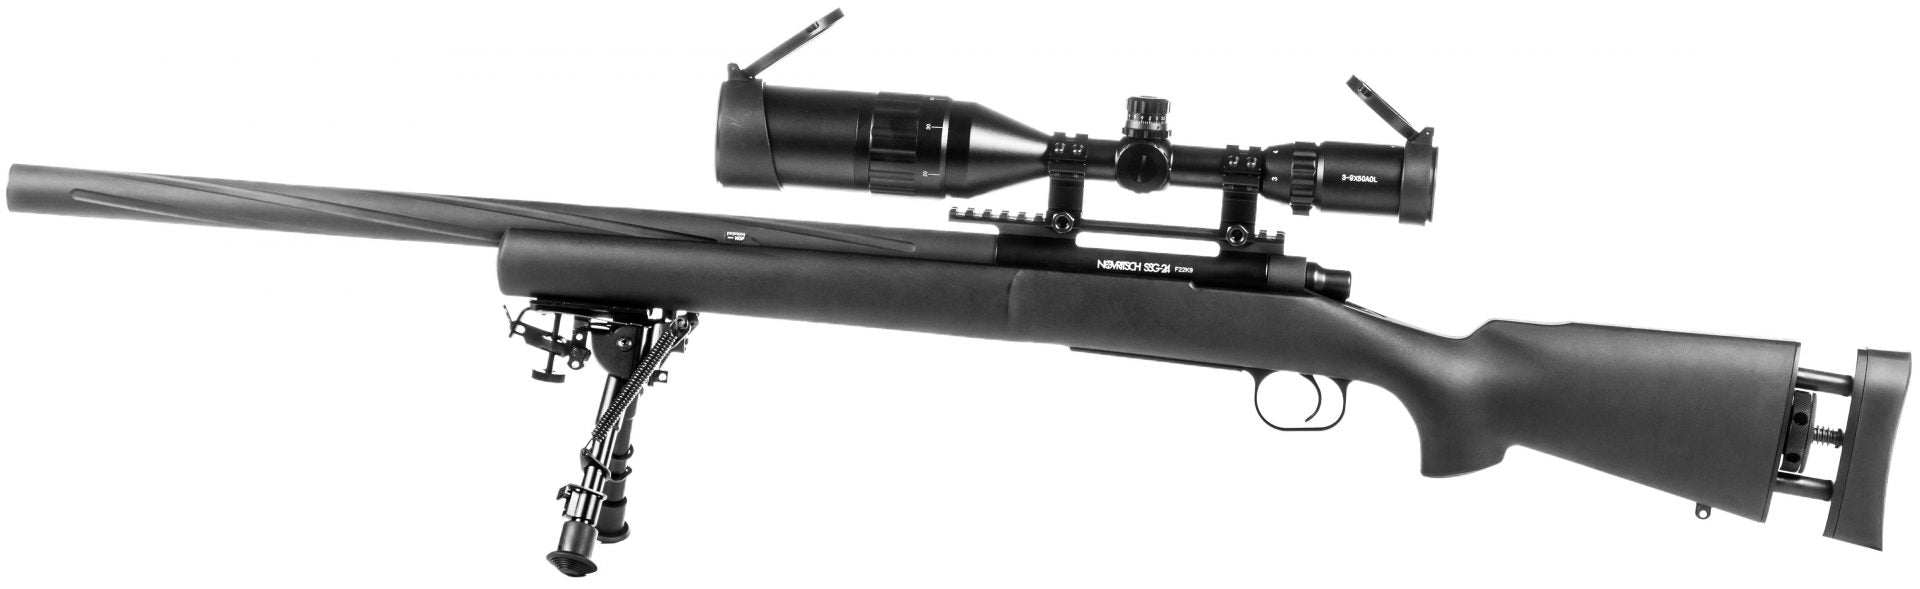 SSG24 Airsoft Sniper Rifle (2.2 joules) - LAST EDITION – Canadian